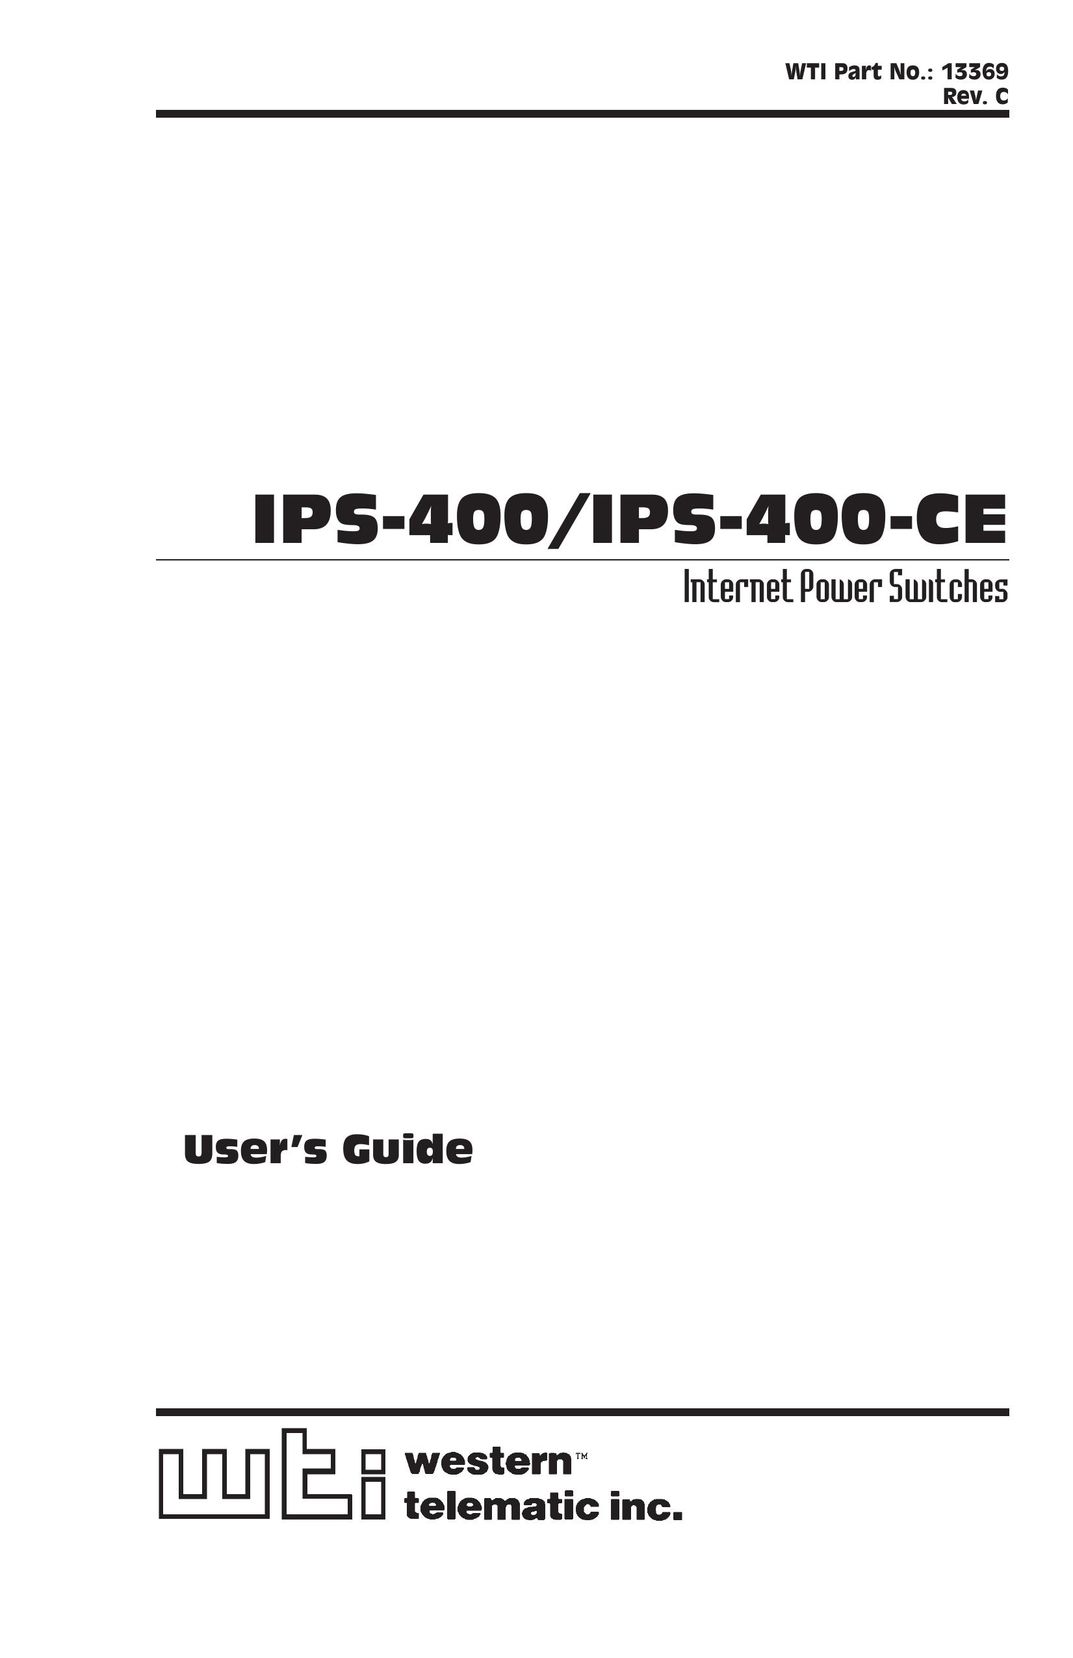 Western Telematic IPS-400 Switch User Manual